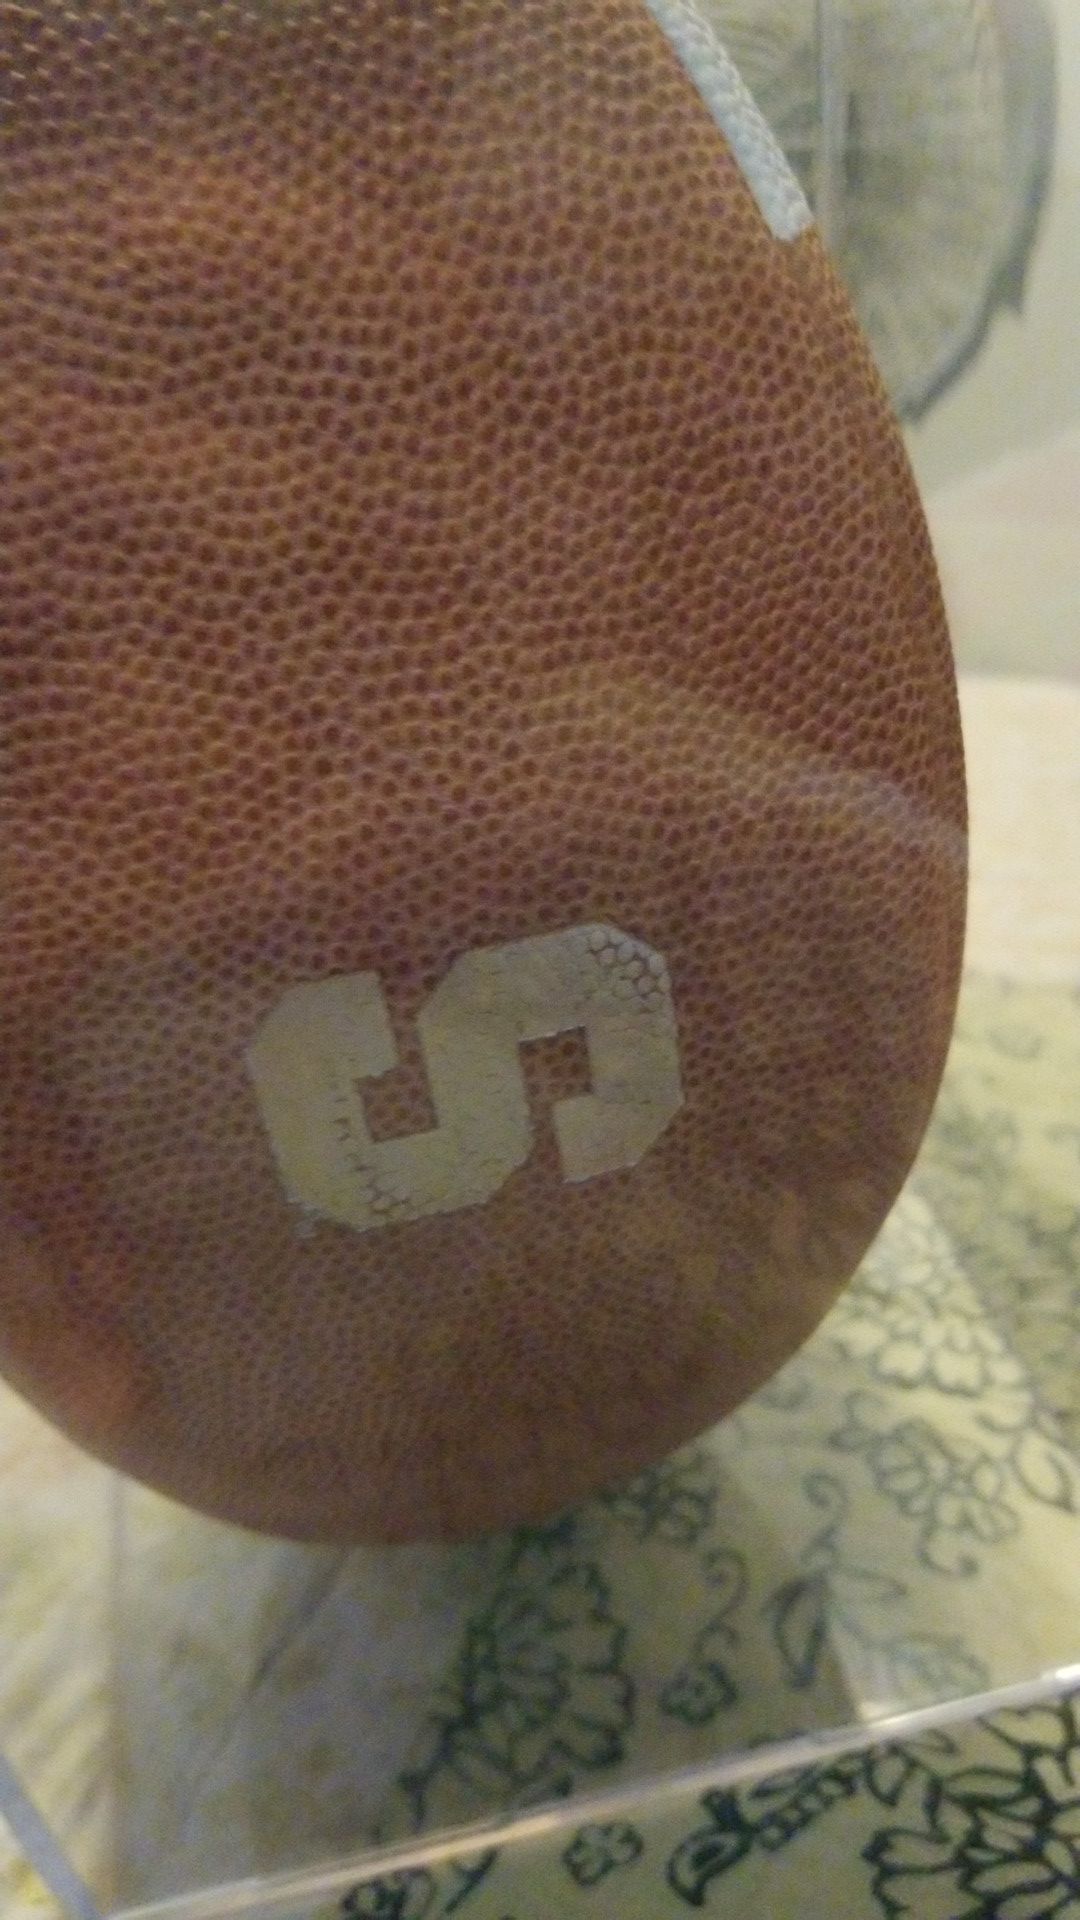 Stanford university game used football